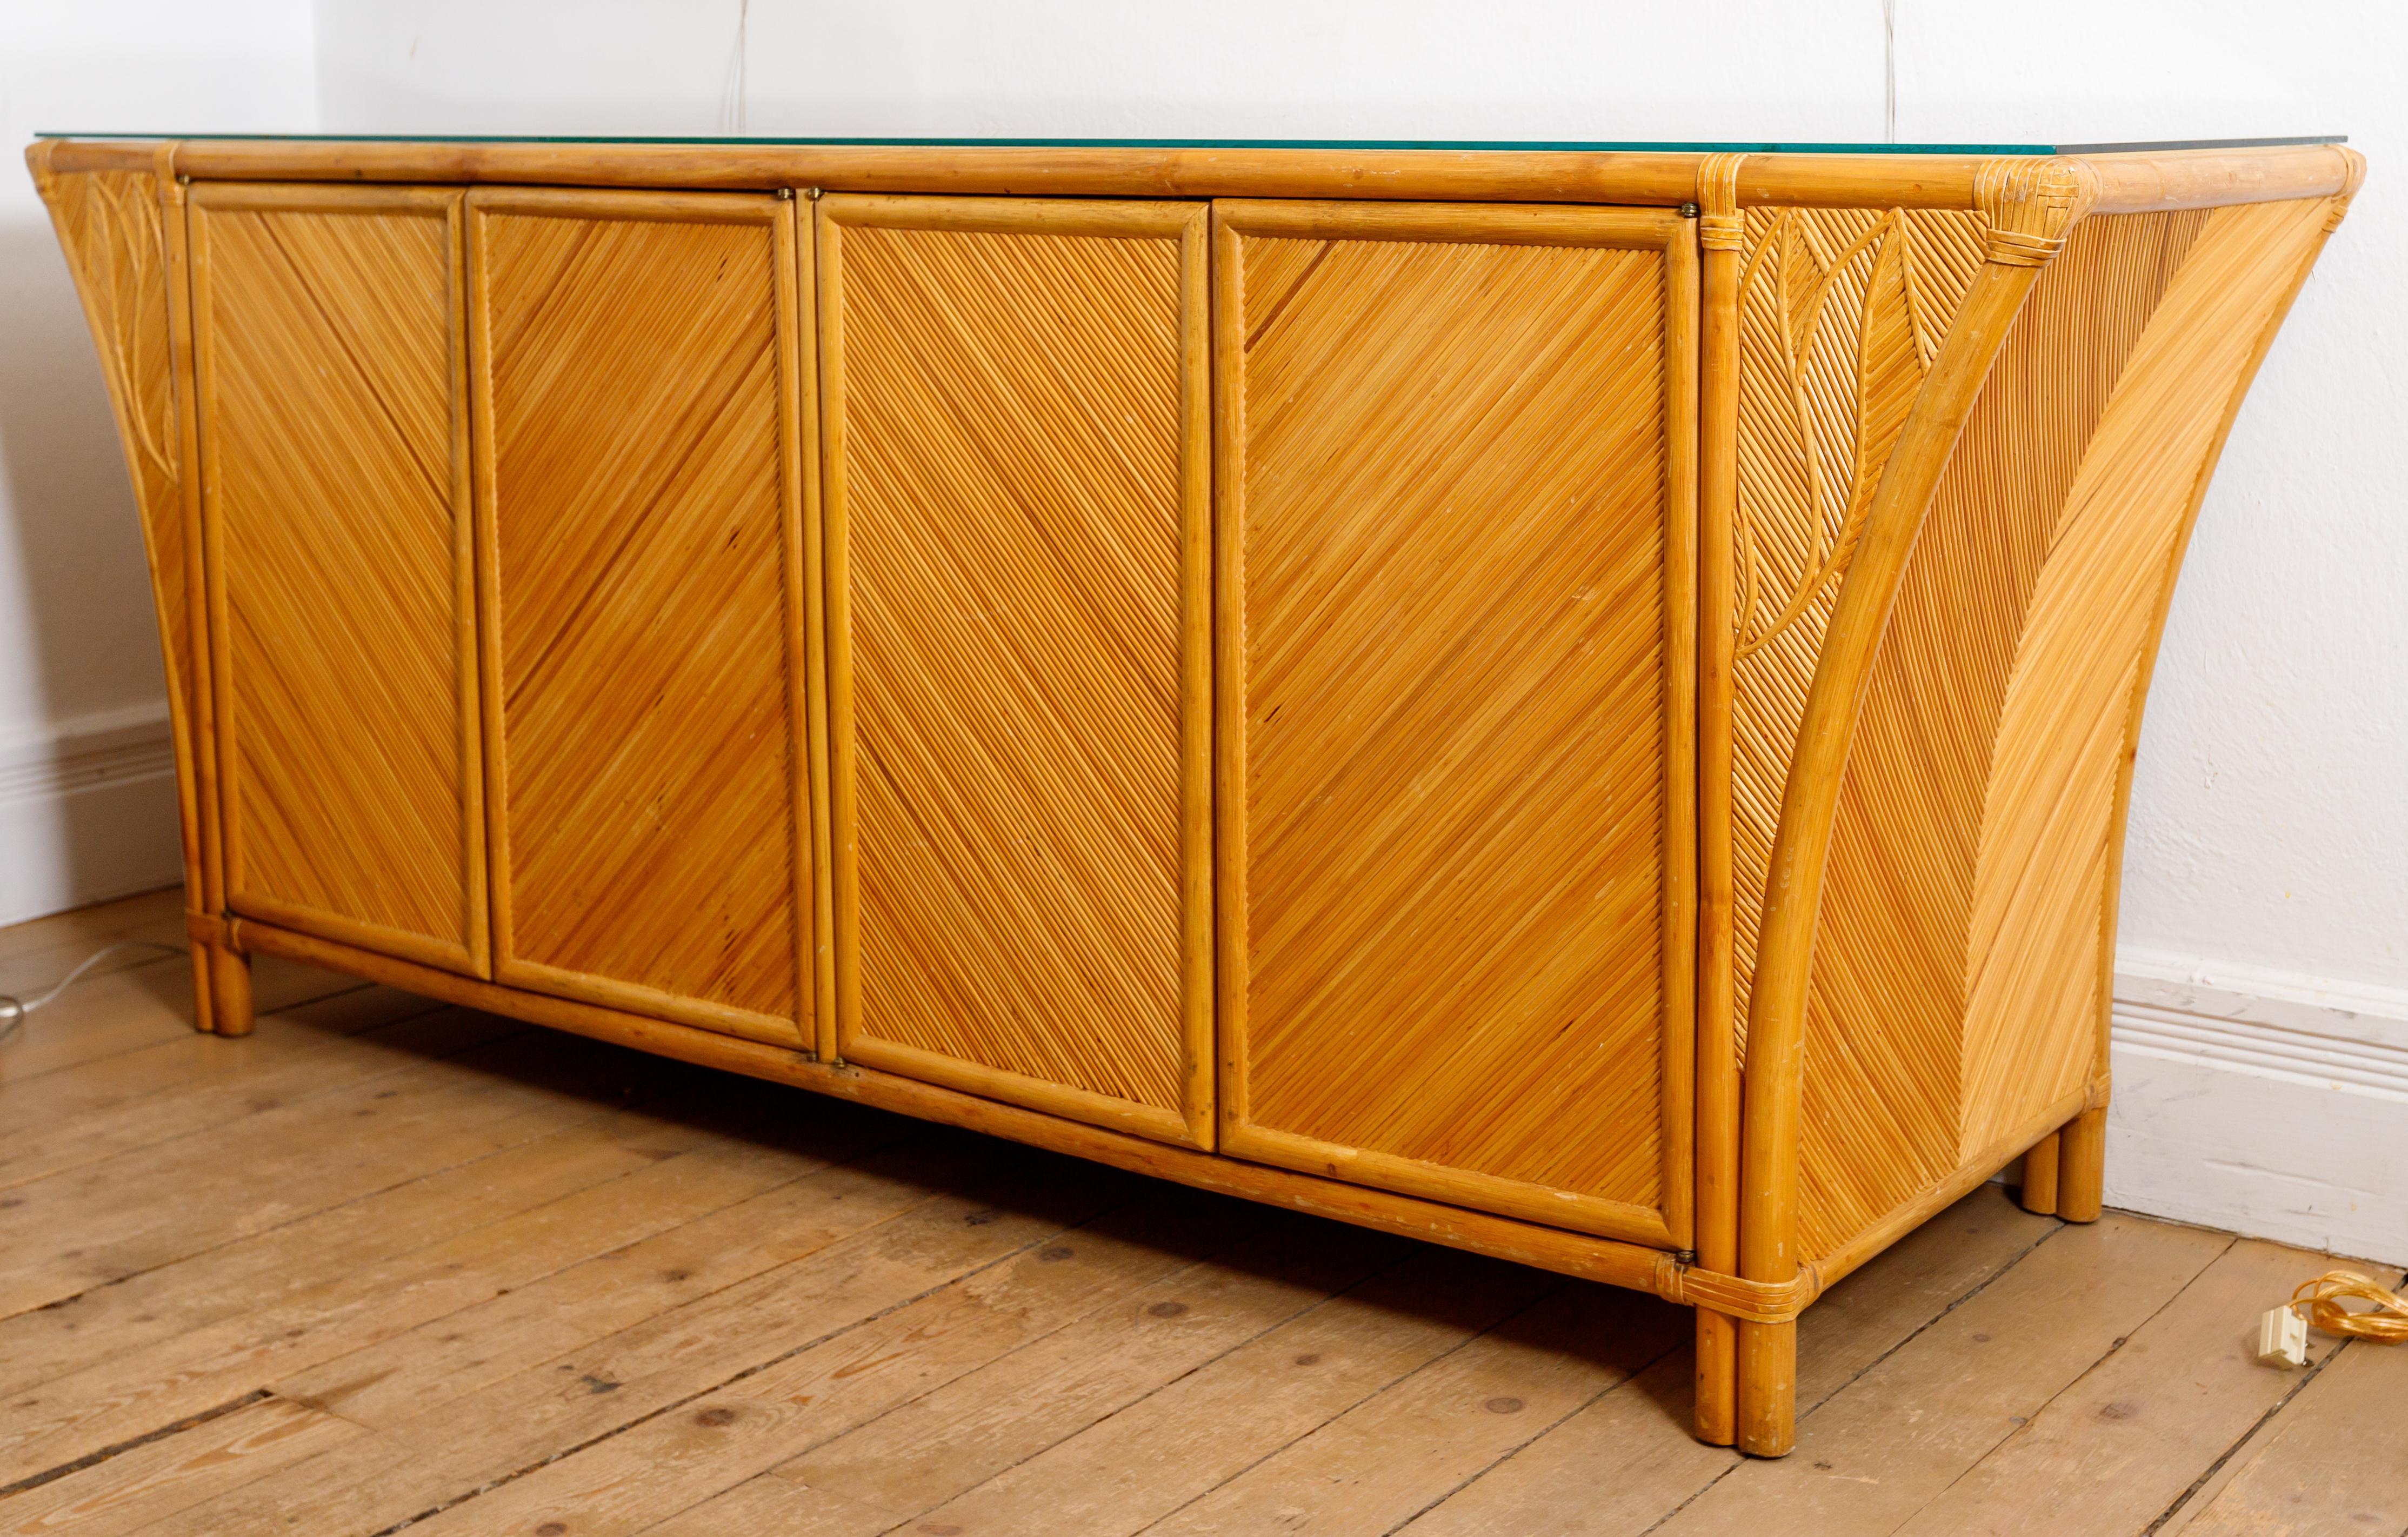 Bamboo credenza featuring four doors, interior shelving and glass top.